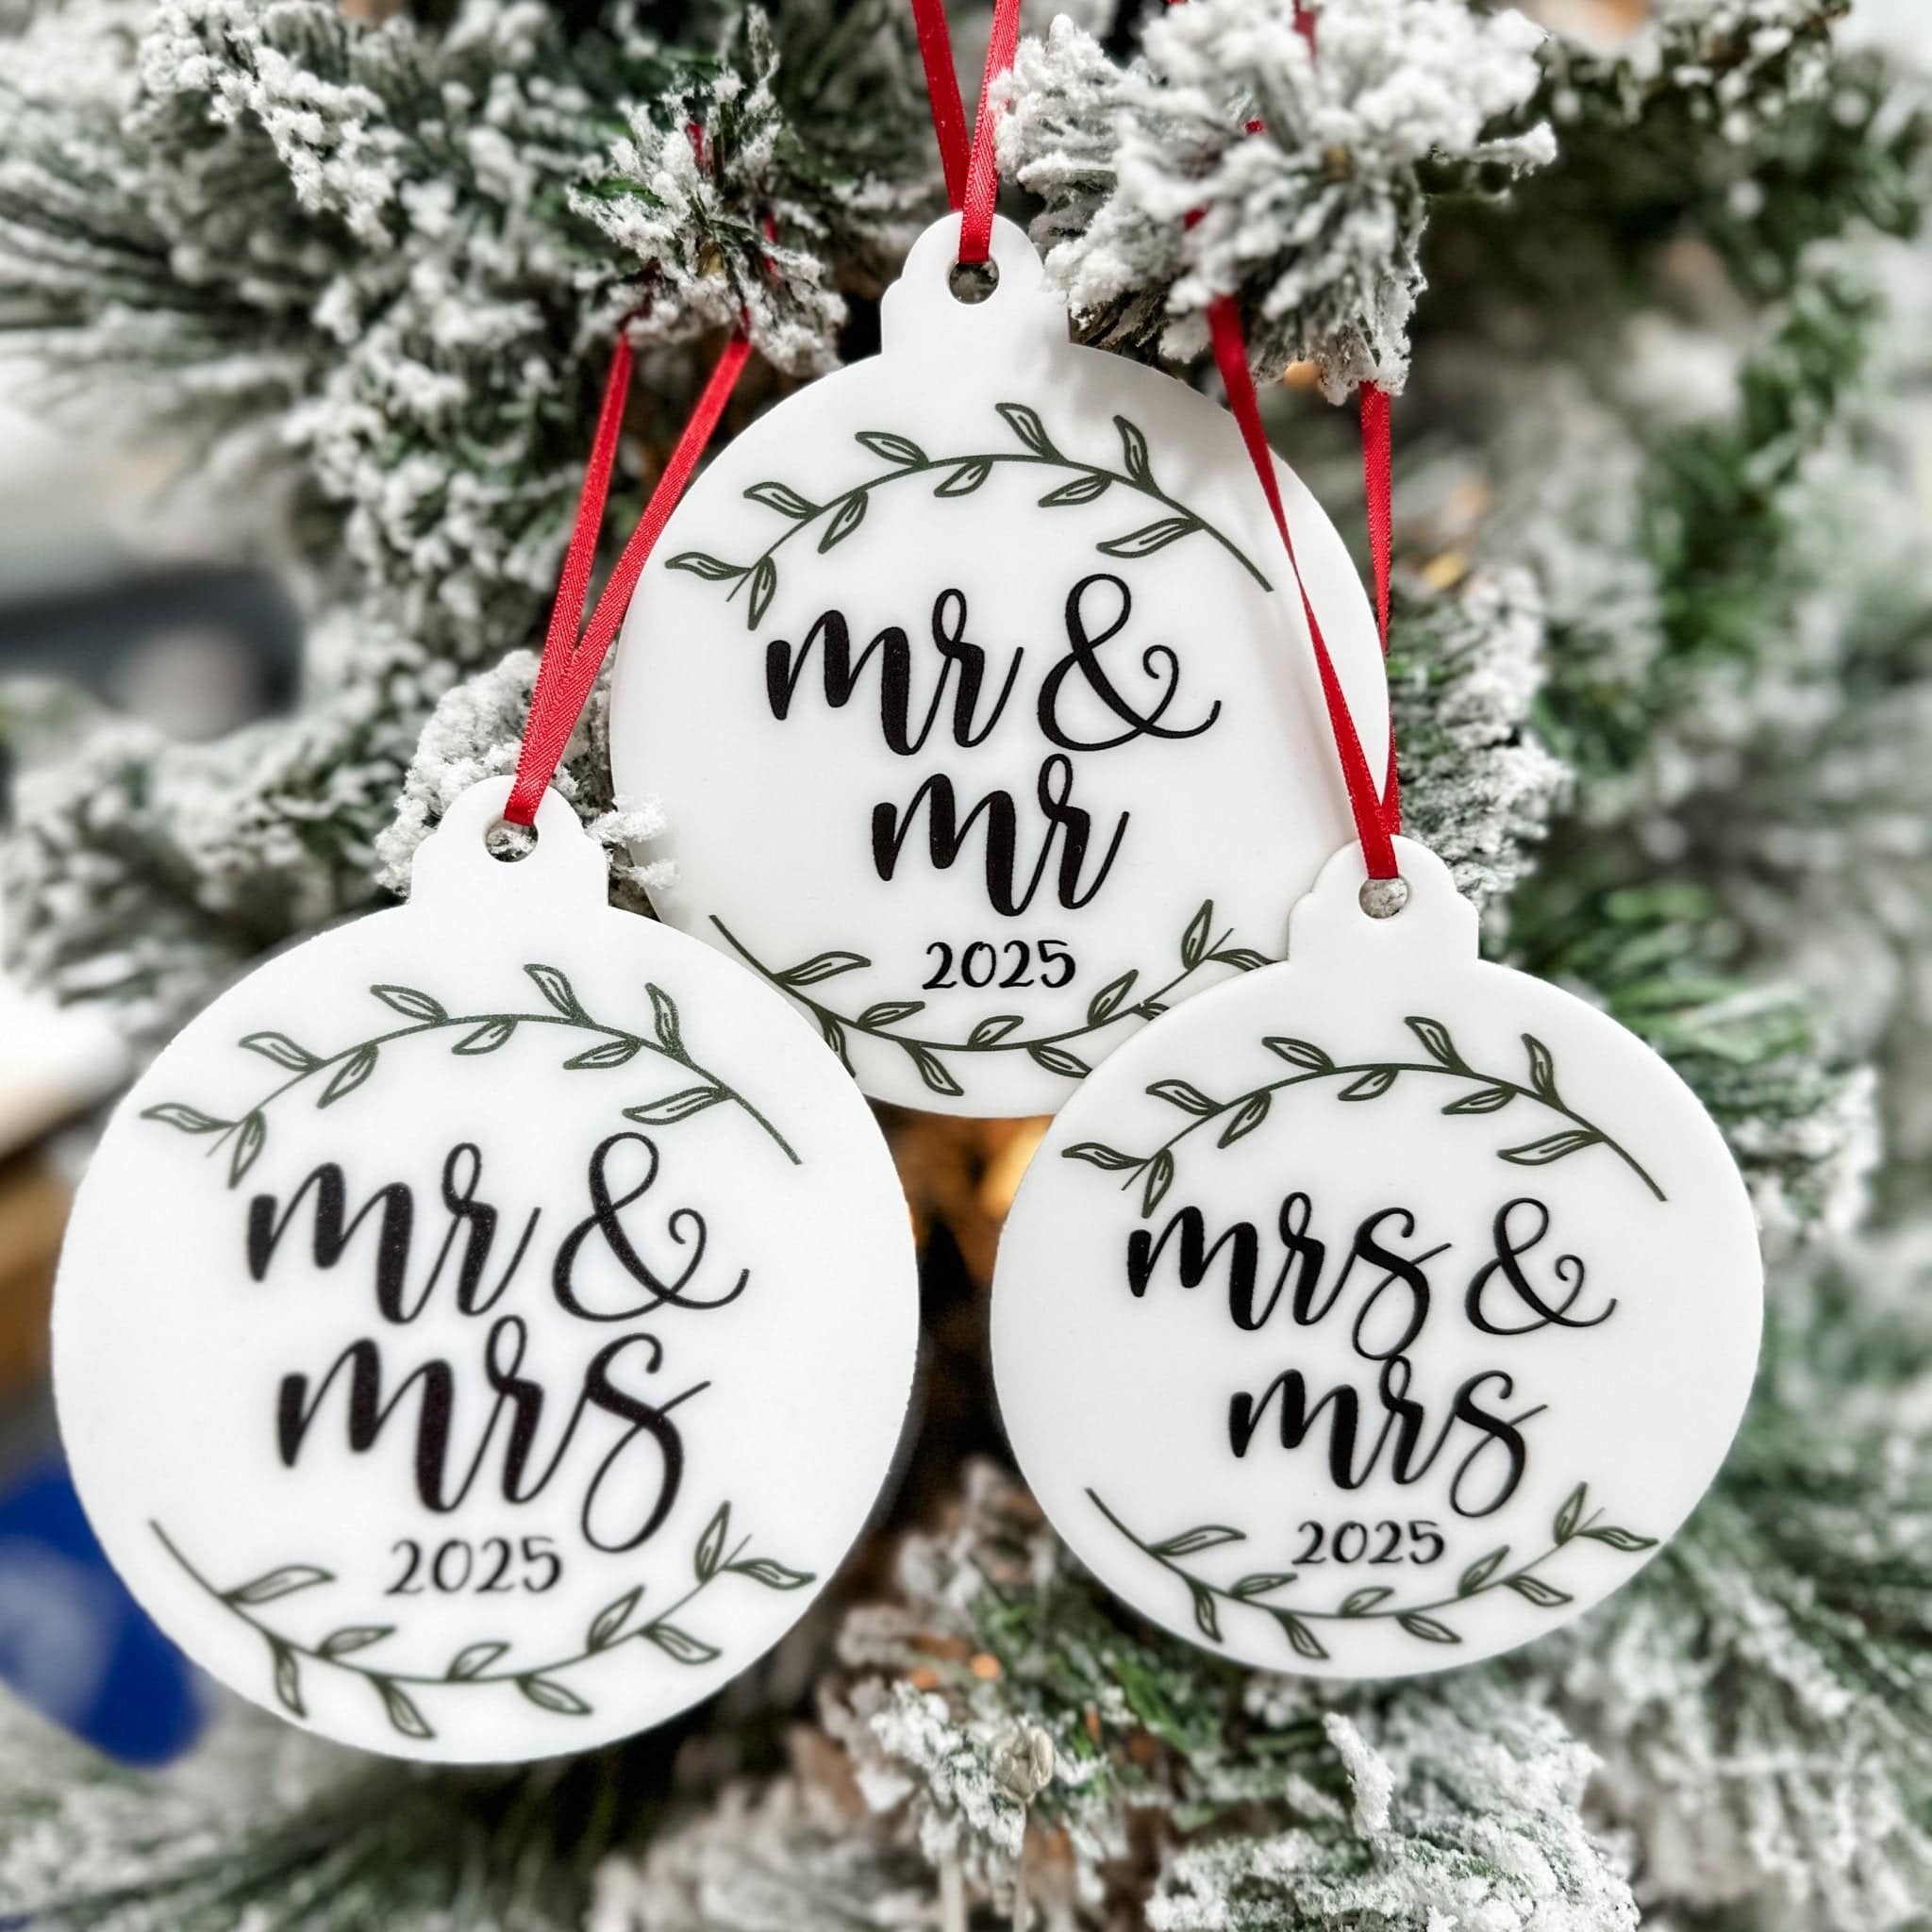 The Year We Got Married Acrylic Ornament - Sticks & Doodles